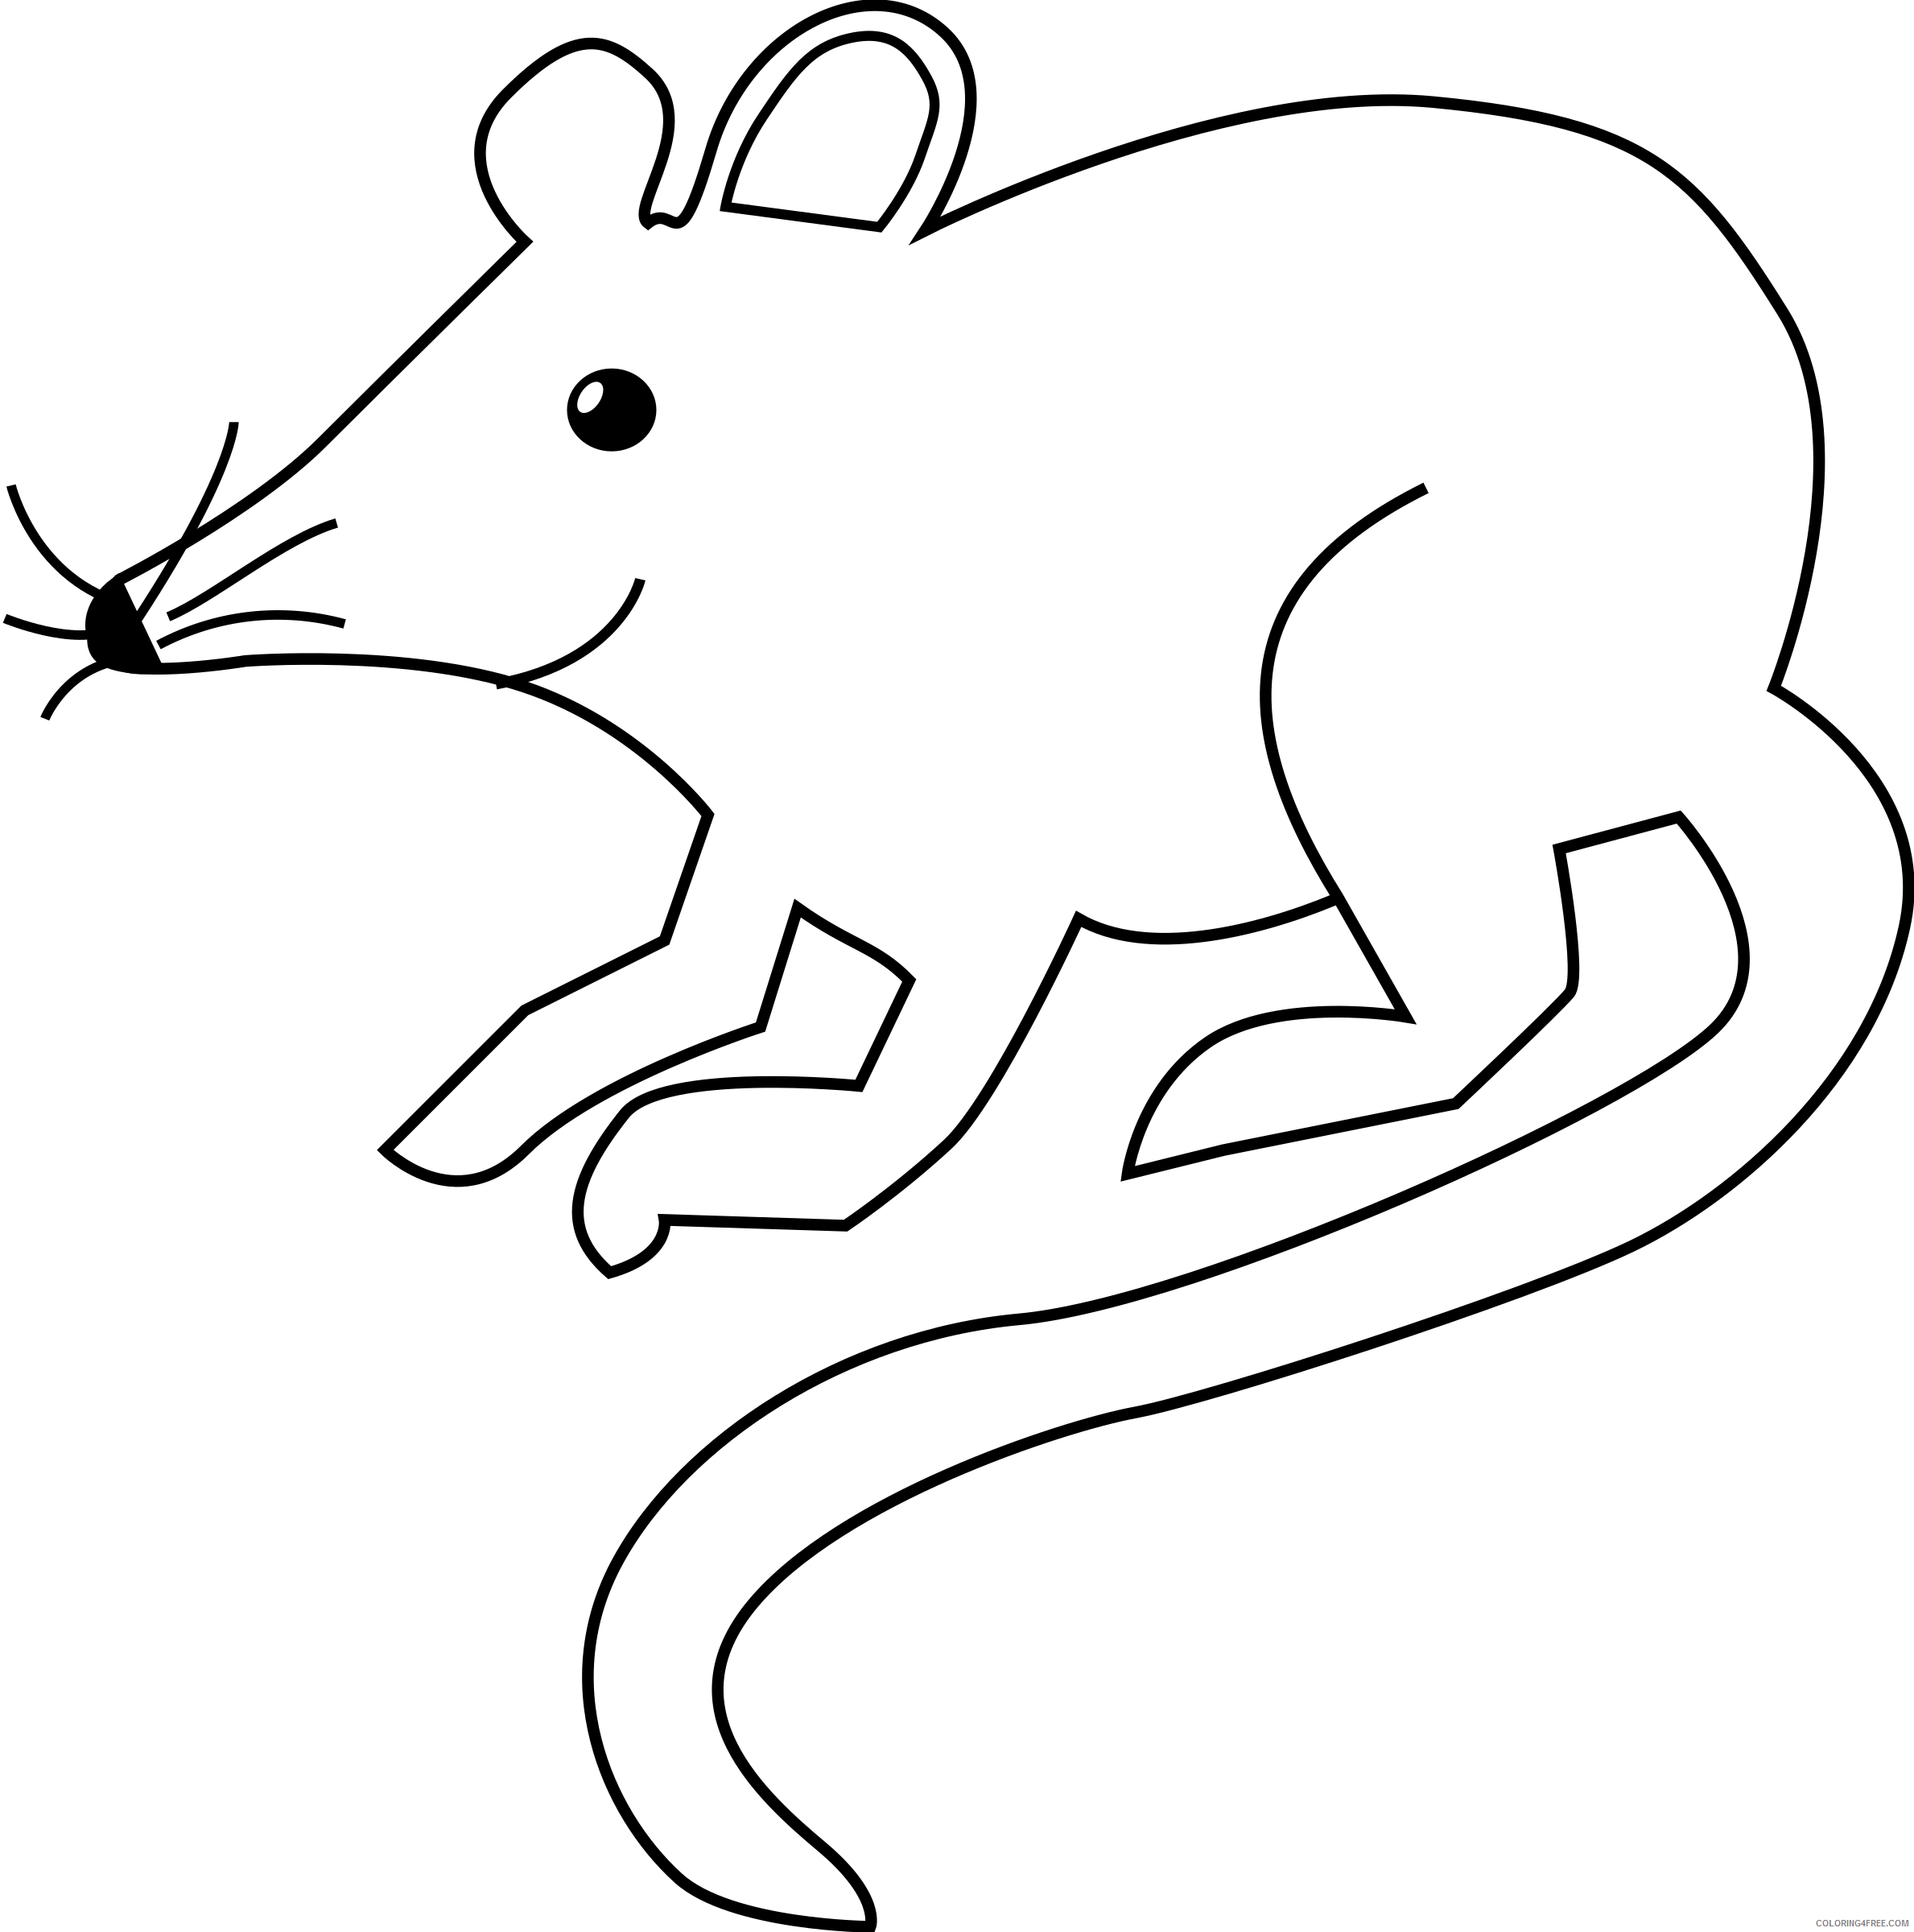 Mouse Outline Coloring Pages da5id1 mouse 1 Printable Coloring4free